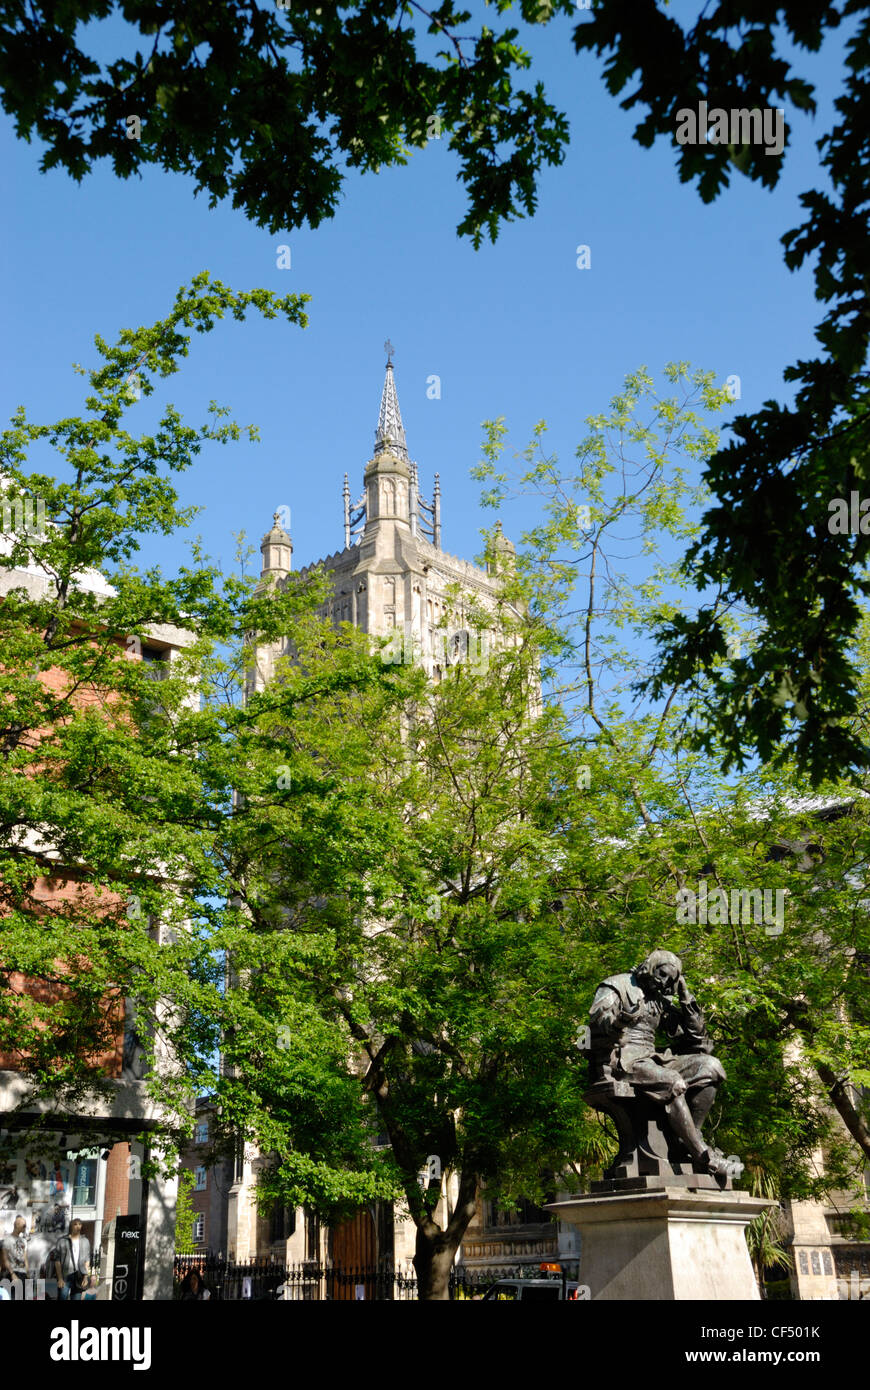 St Peter Mancroft Church and statue of Sir Thomas Browne in Market Place. Stock Photo